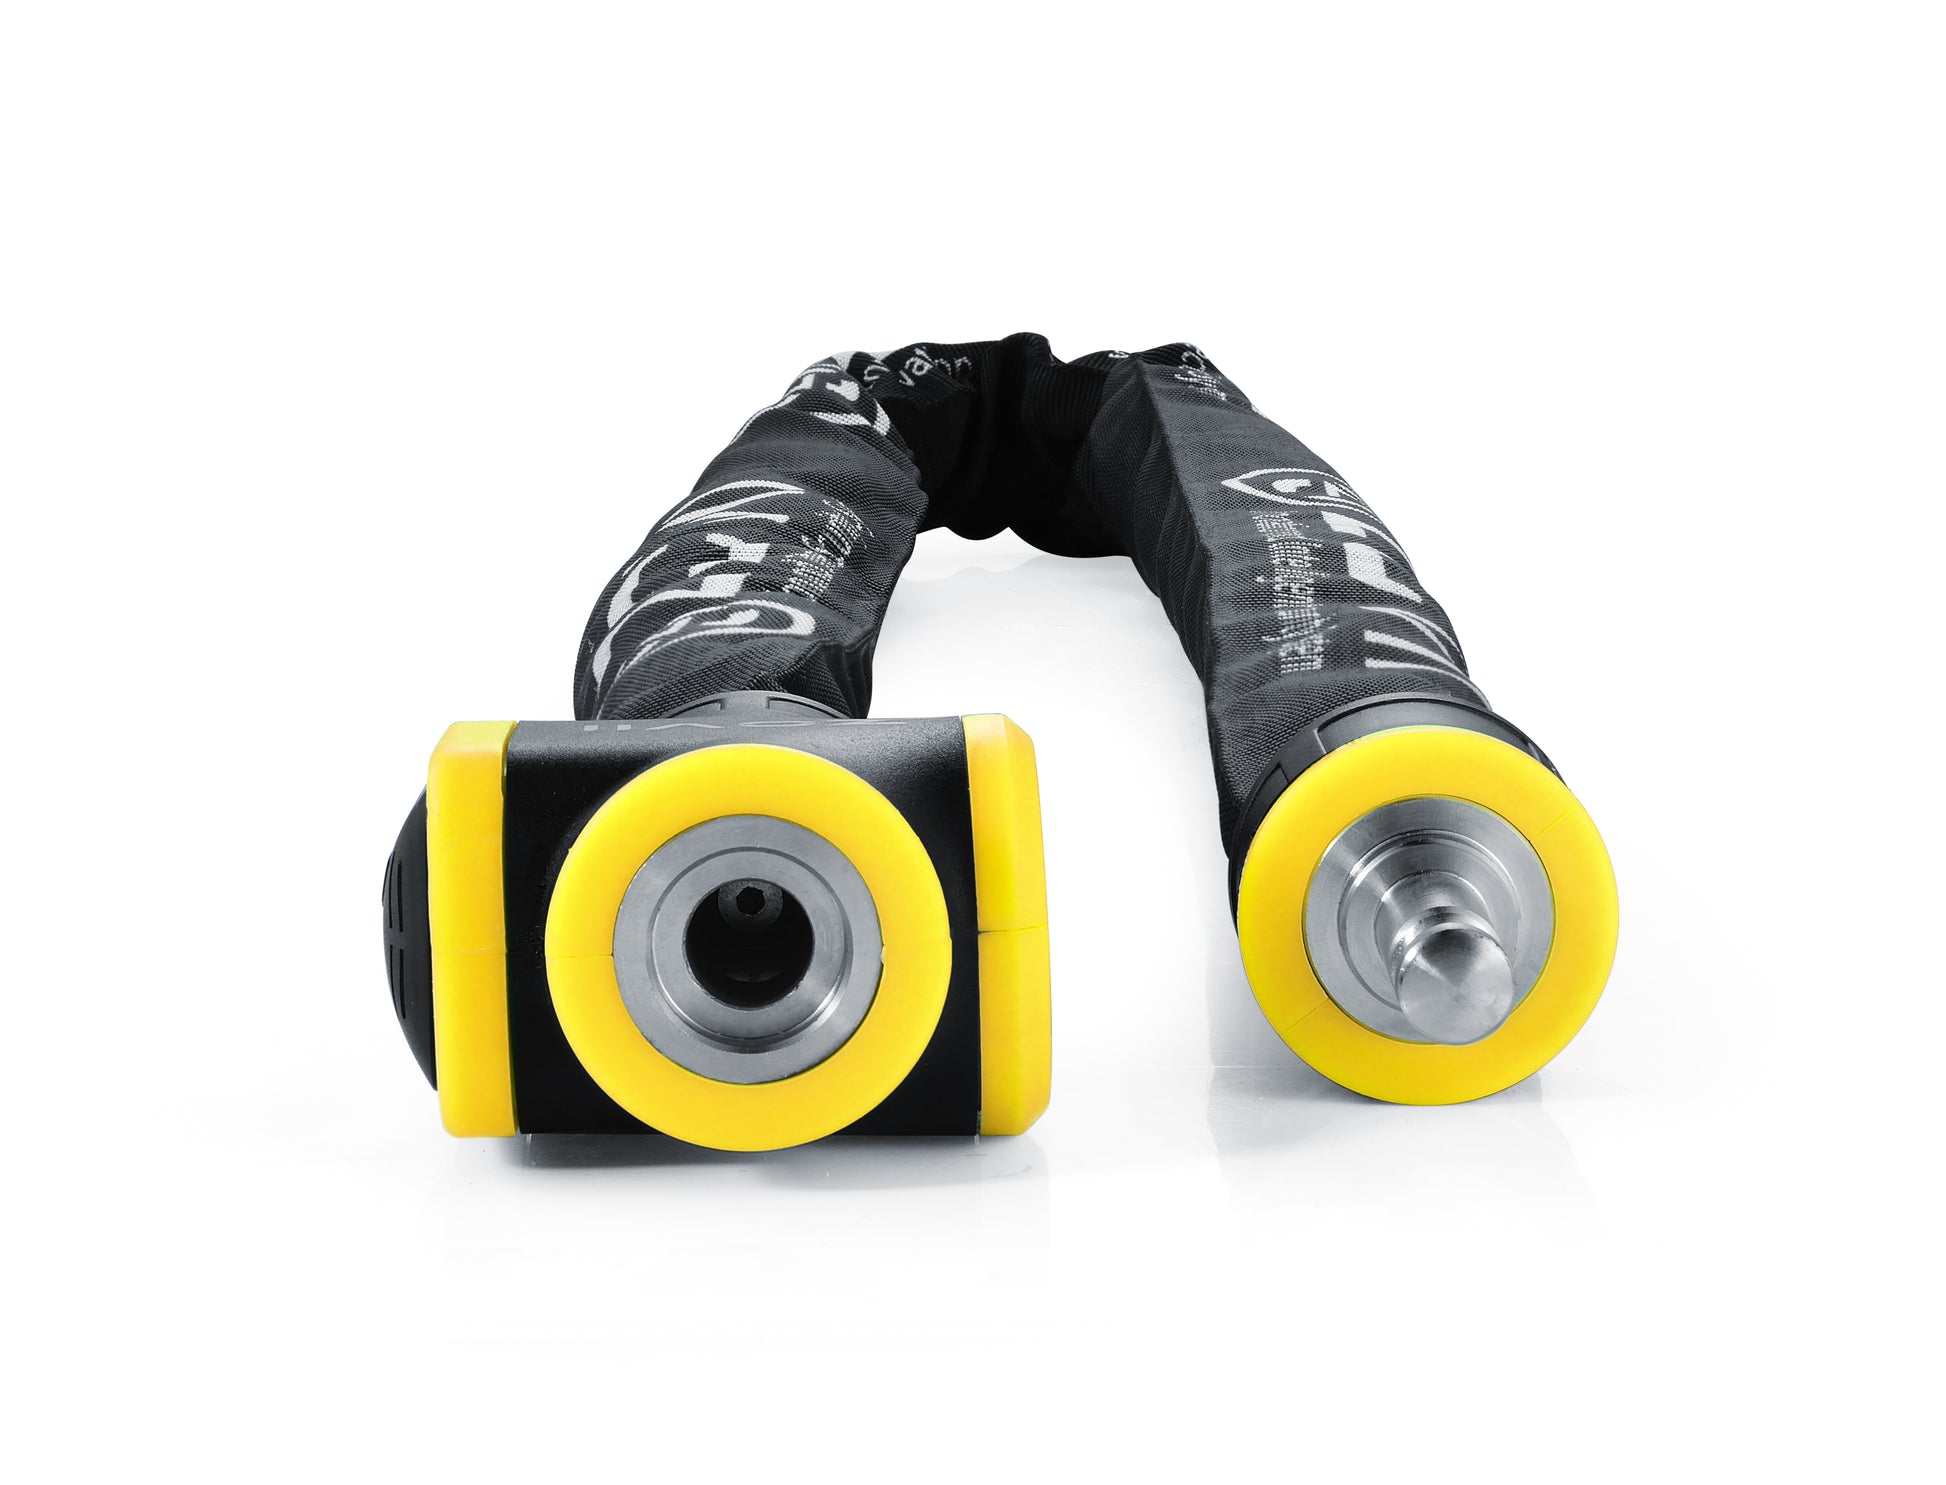 The image showcases a Blackstone alarm chain lock laid out against a white background. The lock has a striking yellow and black color scheme which is visually appealing and would stand out when in use, potentially adding to the deterrent effect. The fabric sleeve covering the chain is branded with the Blackstone logo, and the lock unit itself appears robust, designed to be a strong theft deterrent